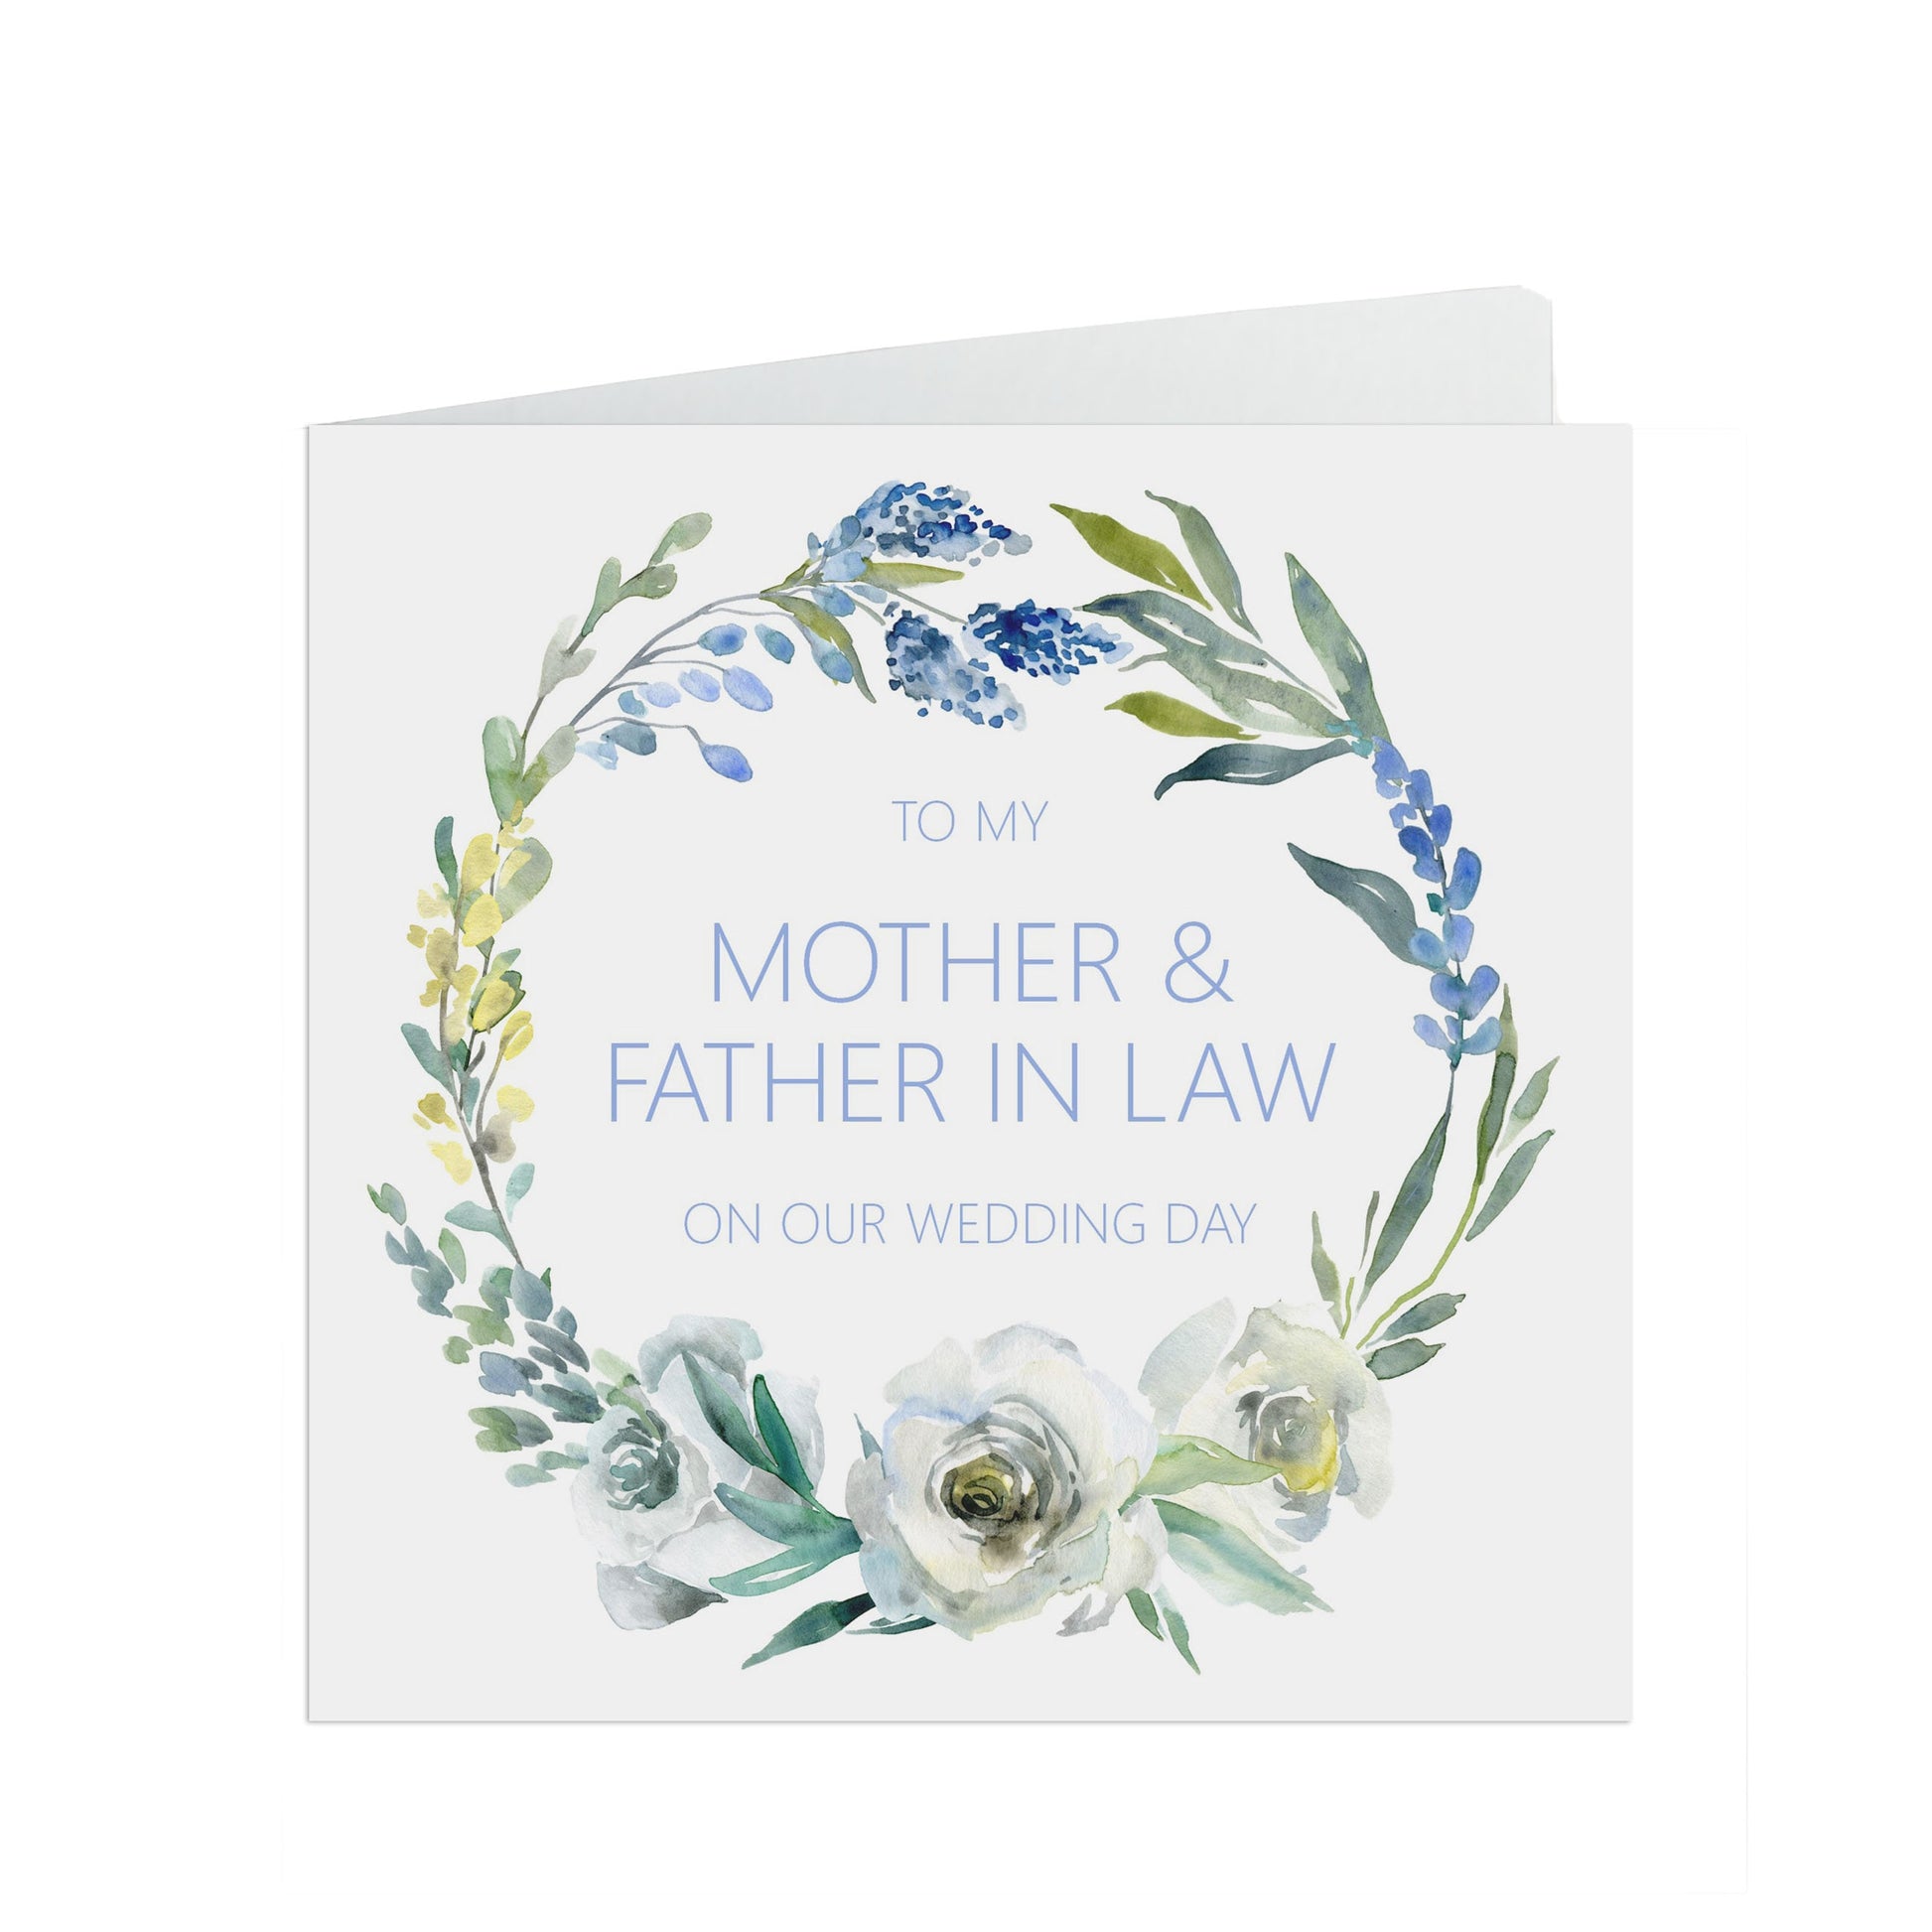 Mother & Father In Law Wedding Day Card - Blue Floral